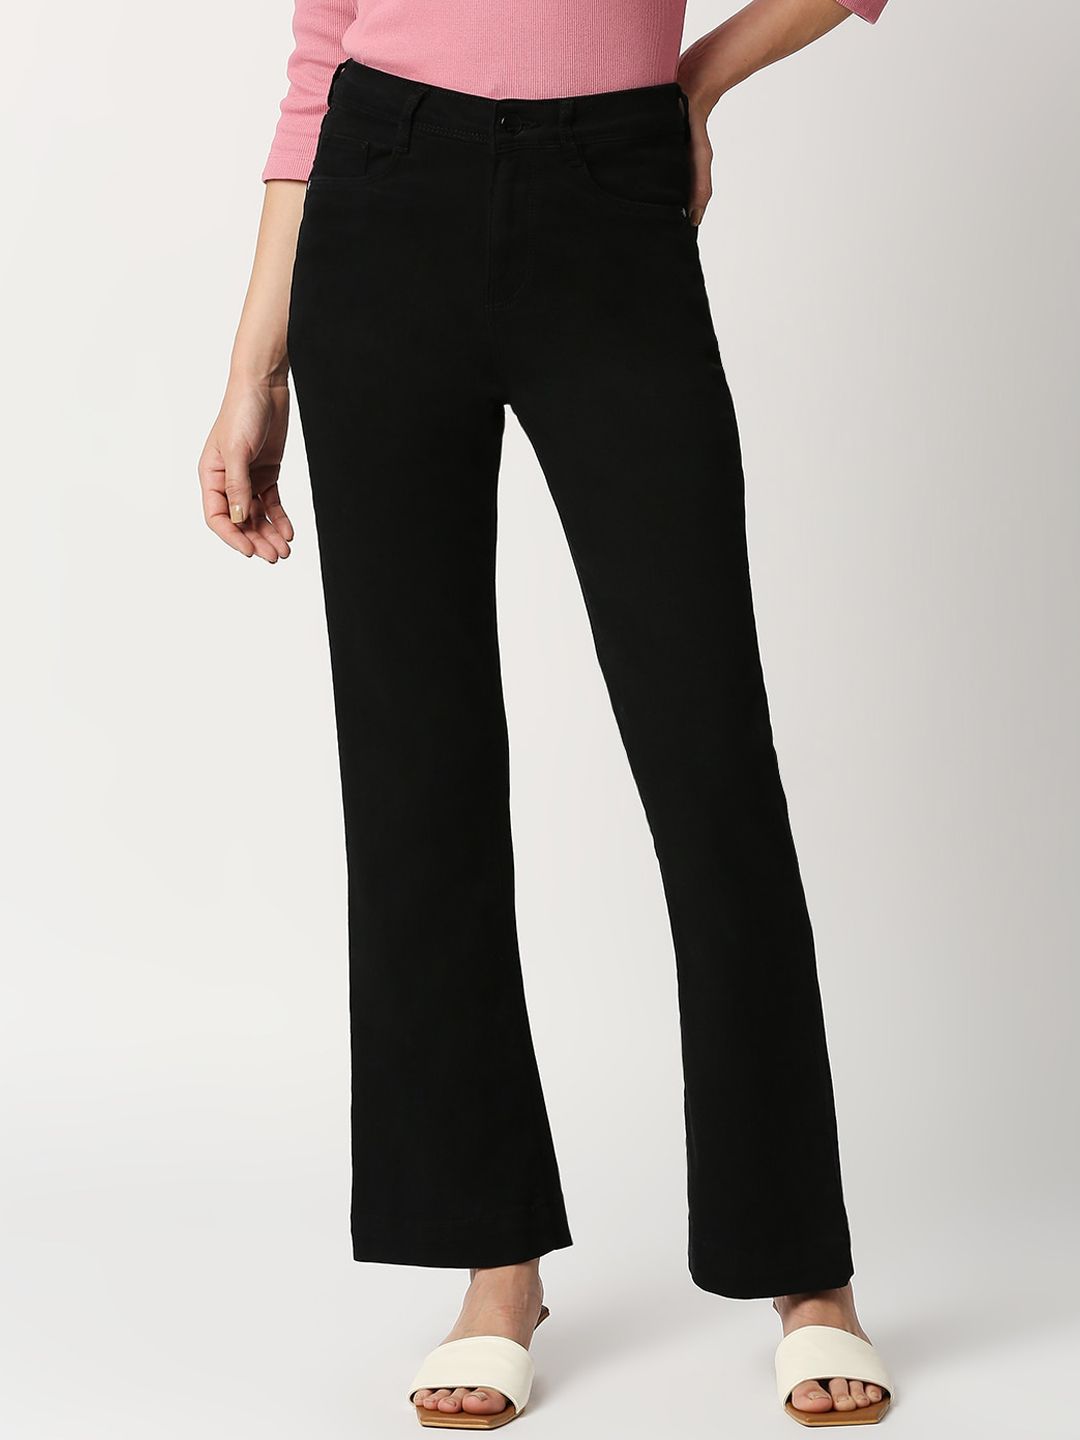 Kraus Jeans Women Black Flared High-Rise Stretchable Jeans Price in India